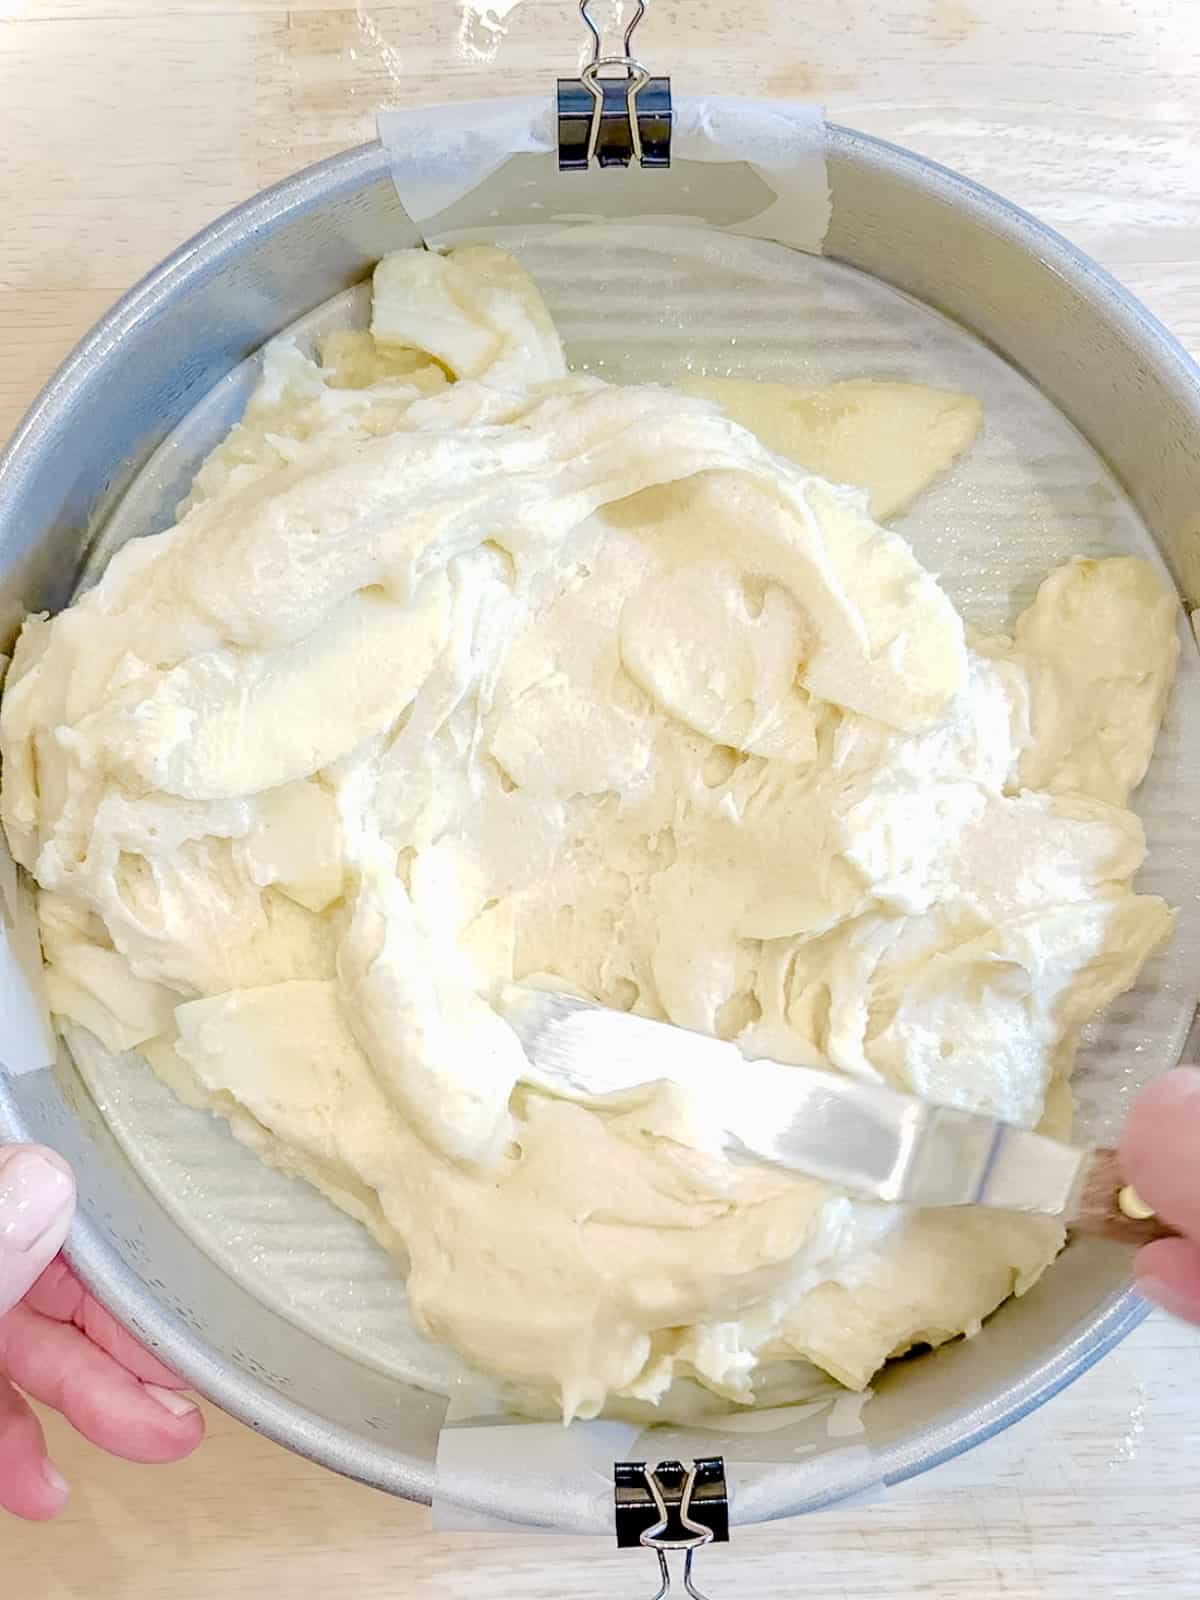 Spreading apple cake batter in parchment lined pan.